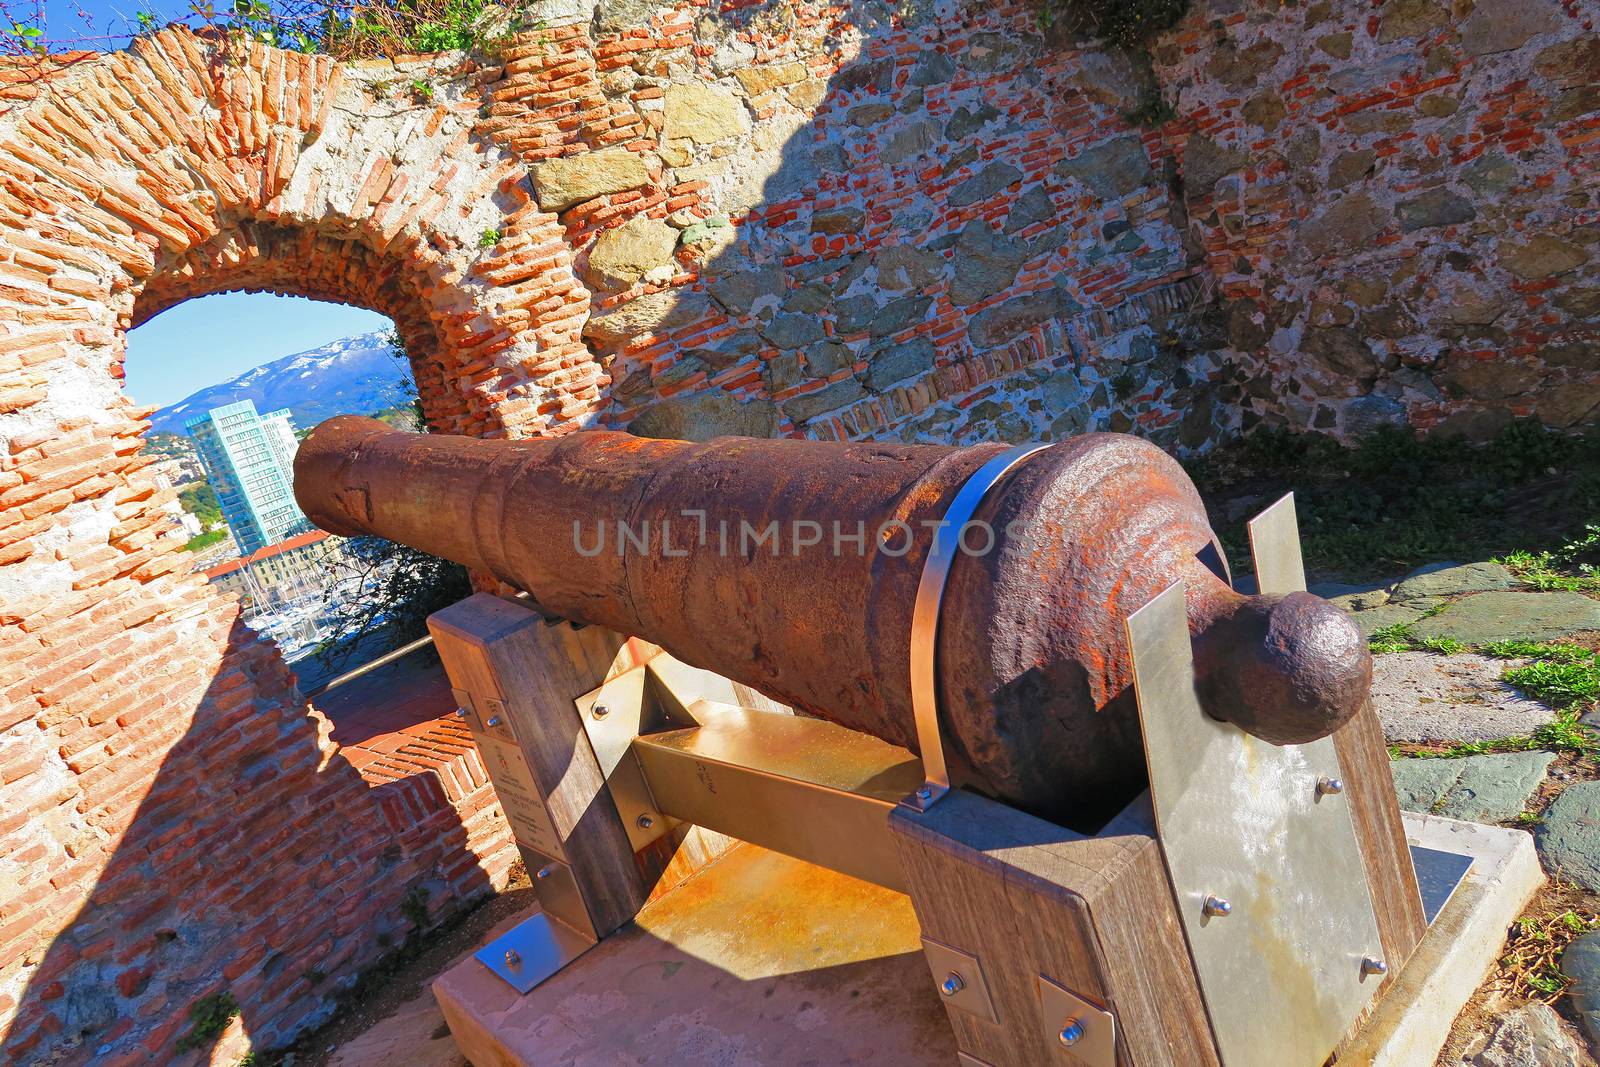 Savona,Italy,22 november 2015. View of a muzzle-loading culverin of the seventeenth century in the Priamar fortress,Savona, Liguria.